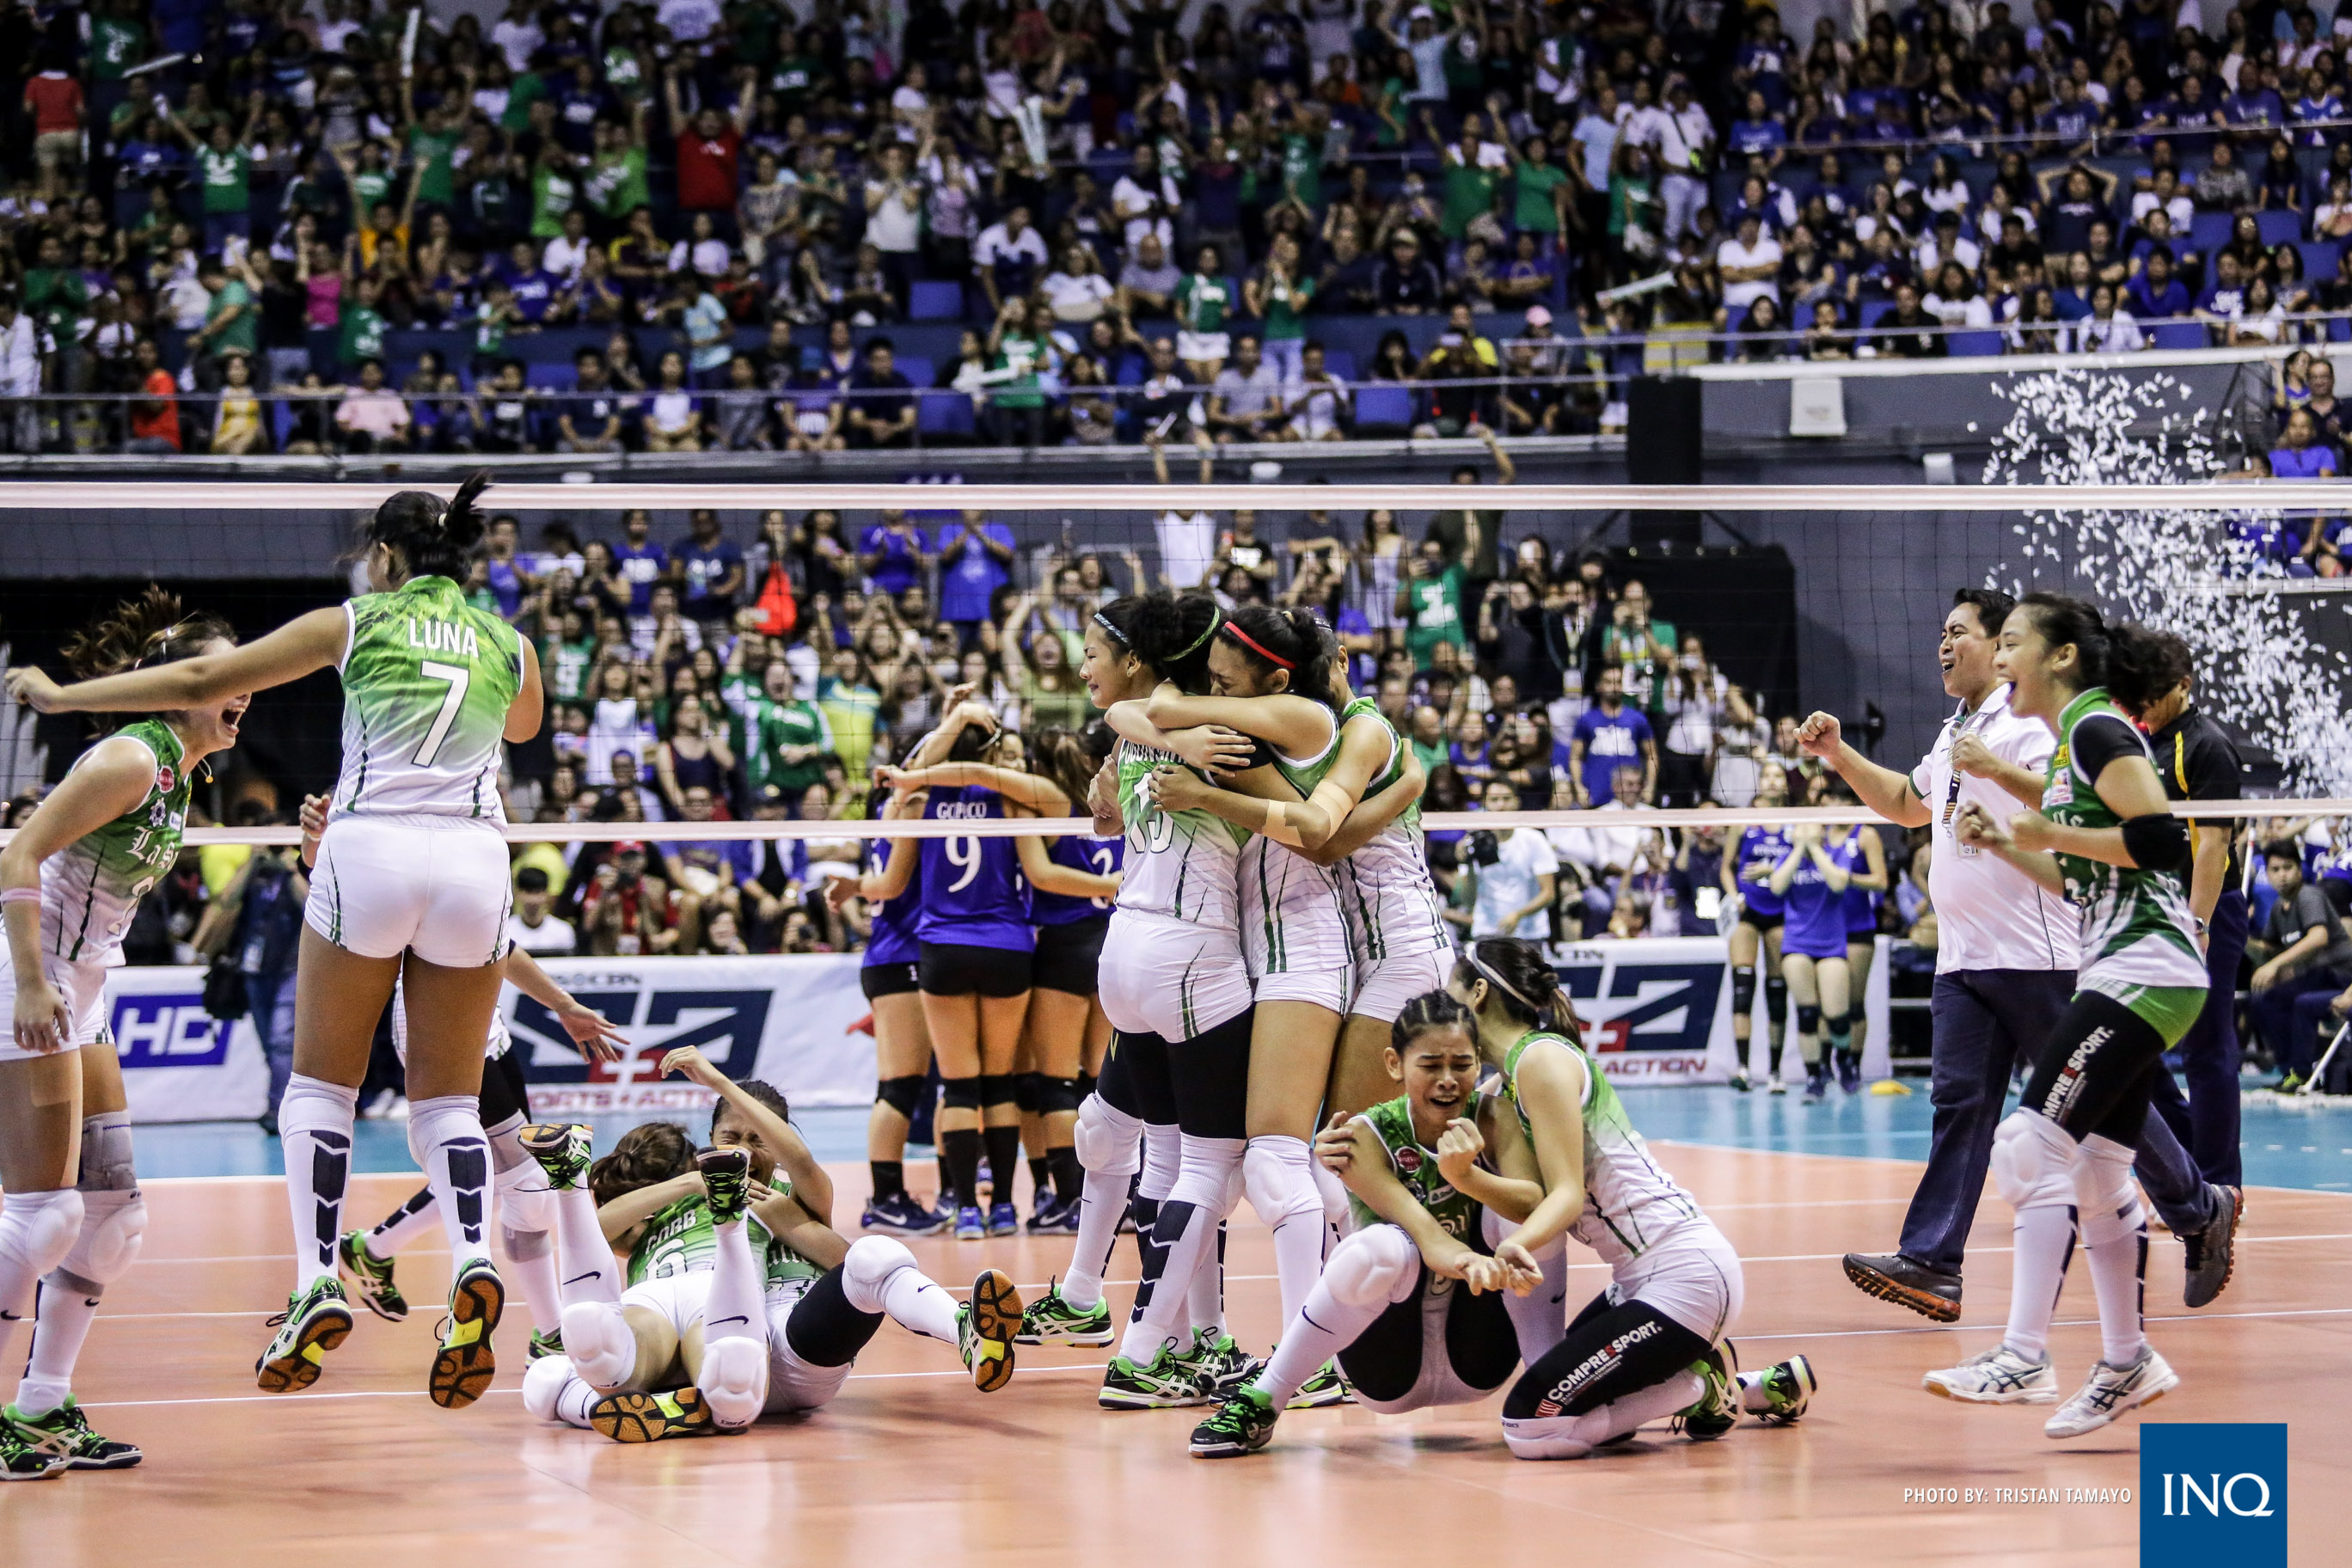 La Salle clinches its 2nd straight UAAP women's volleyball title. Photo by Tristan Tamayo/INQUIRER.net